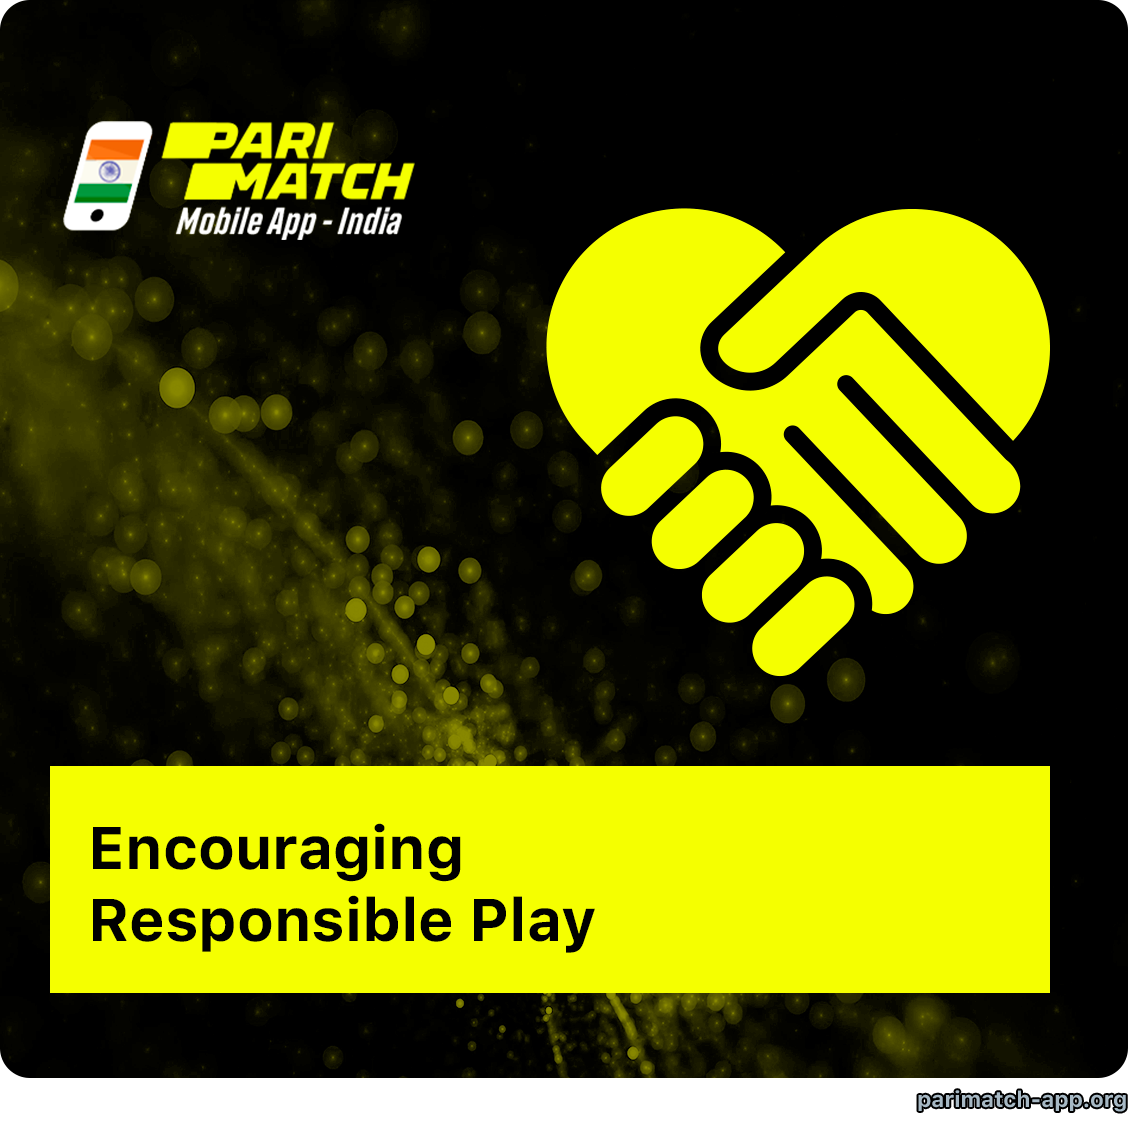 Parimatch India Encourages Responsible Play and closely monitors compliance with the rules